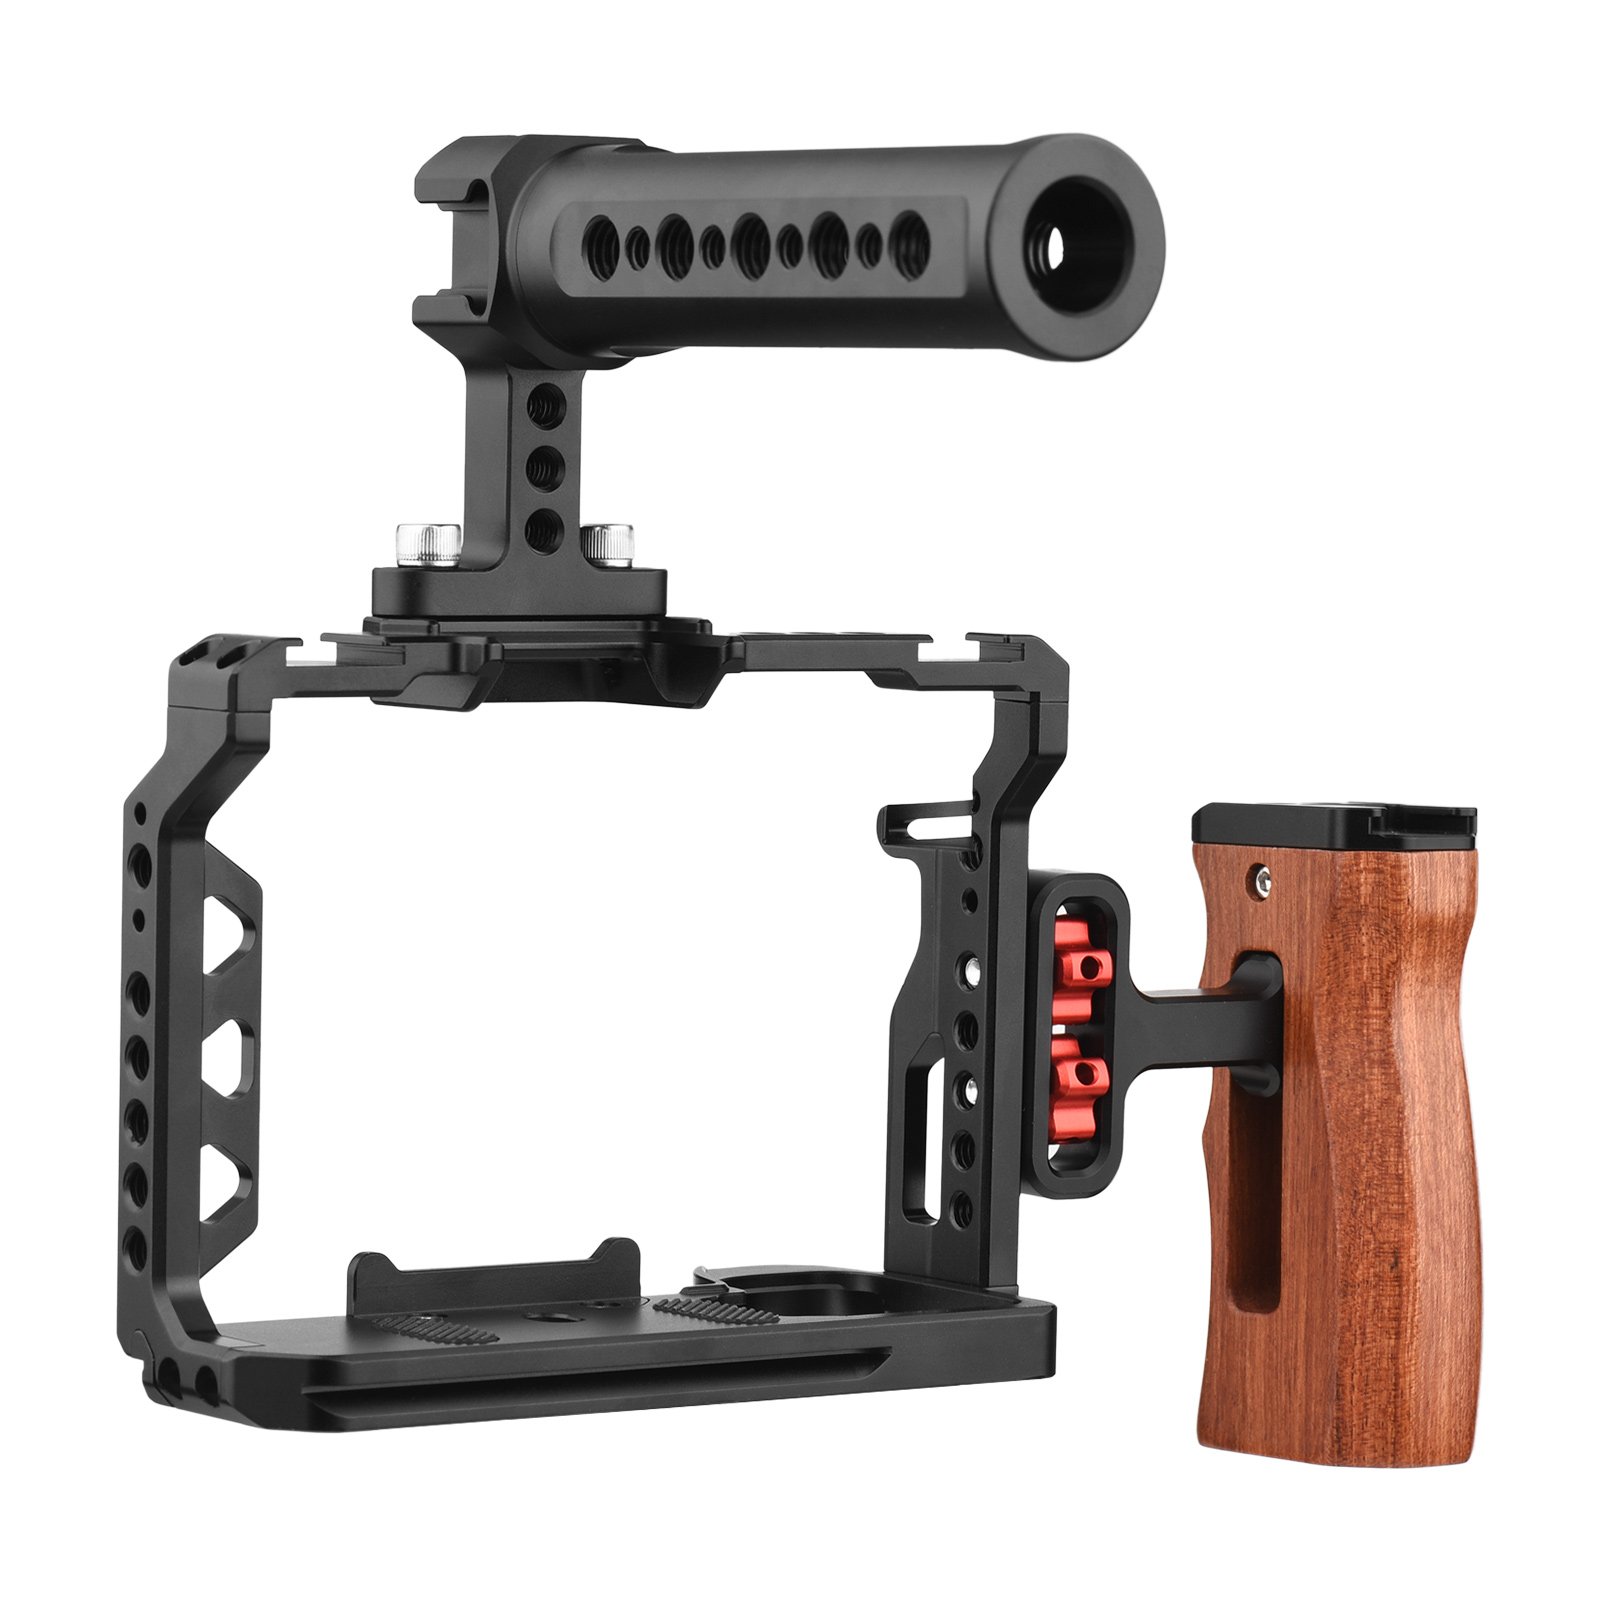 Andoer Camera Cage Kit Sony A7iii Cage Accessories Aluminum Alloy